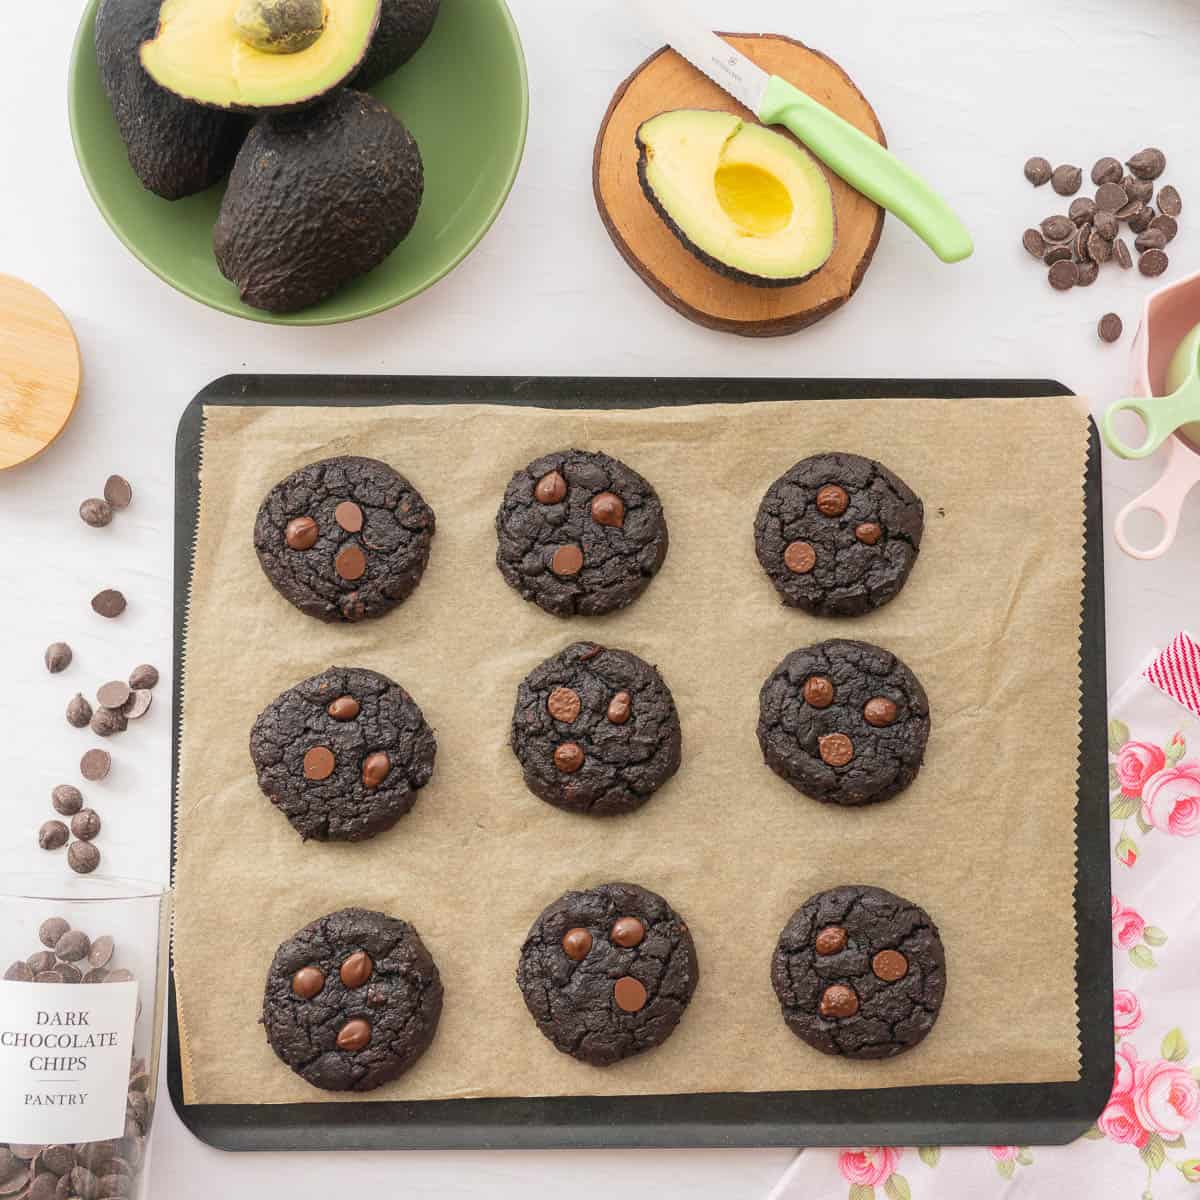 A tray of baked avocado cookies on a cookie tray next to a bowl of avocados and jar of chocolate drops,